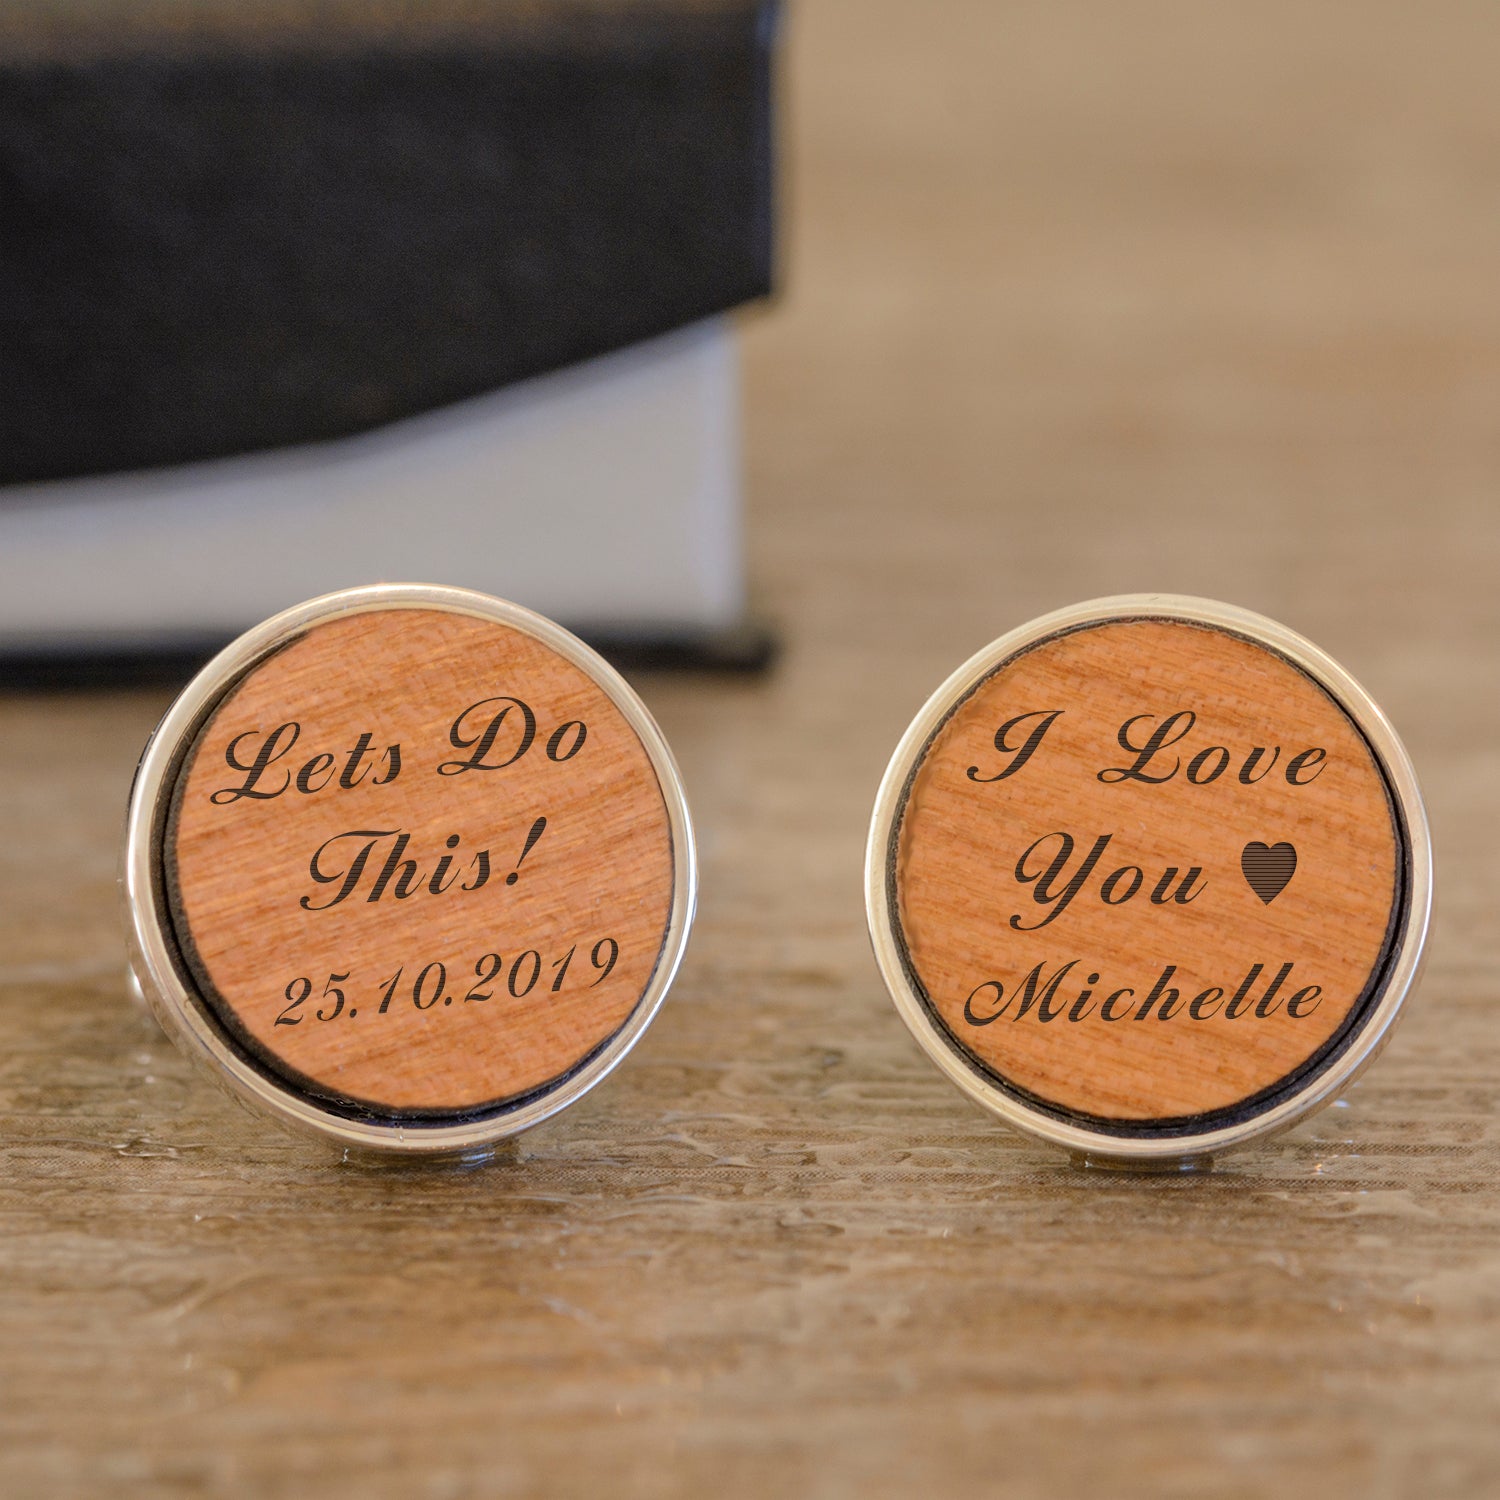 Personalised Lets Do This! Cufflinks